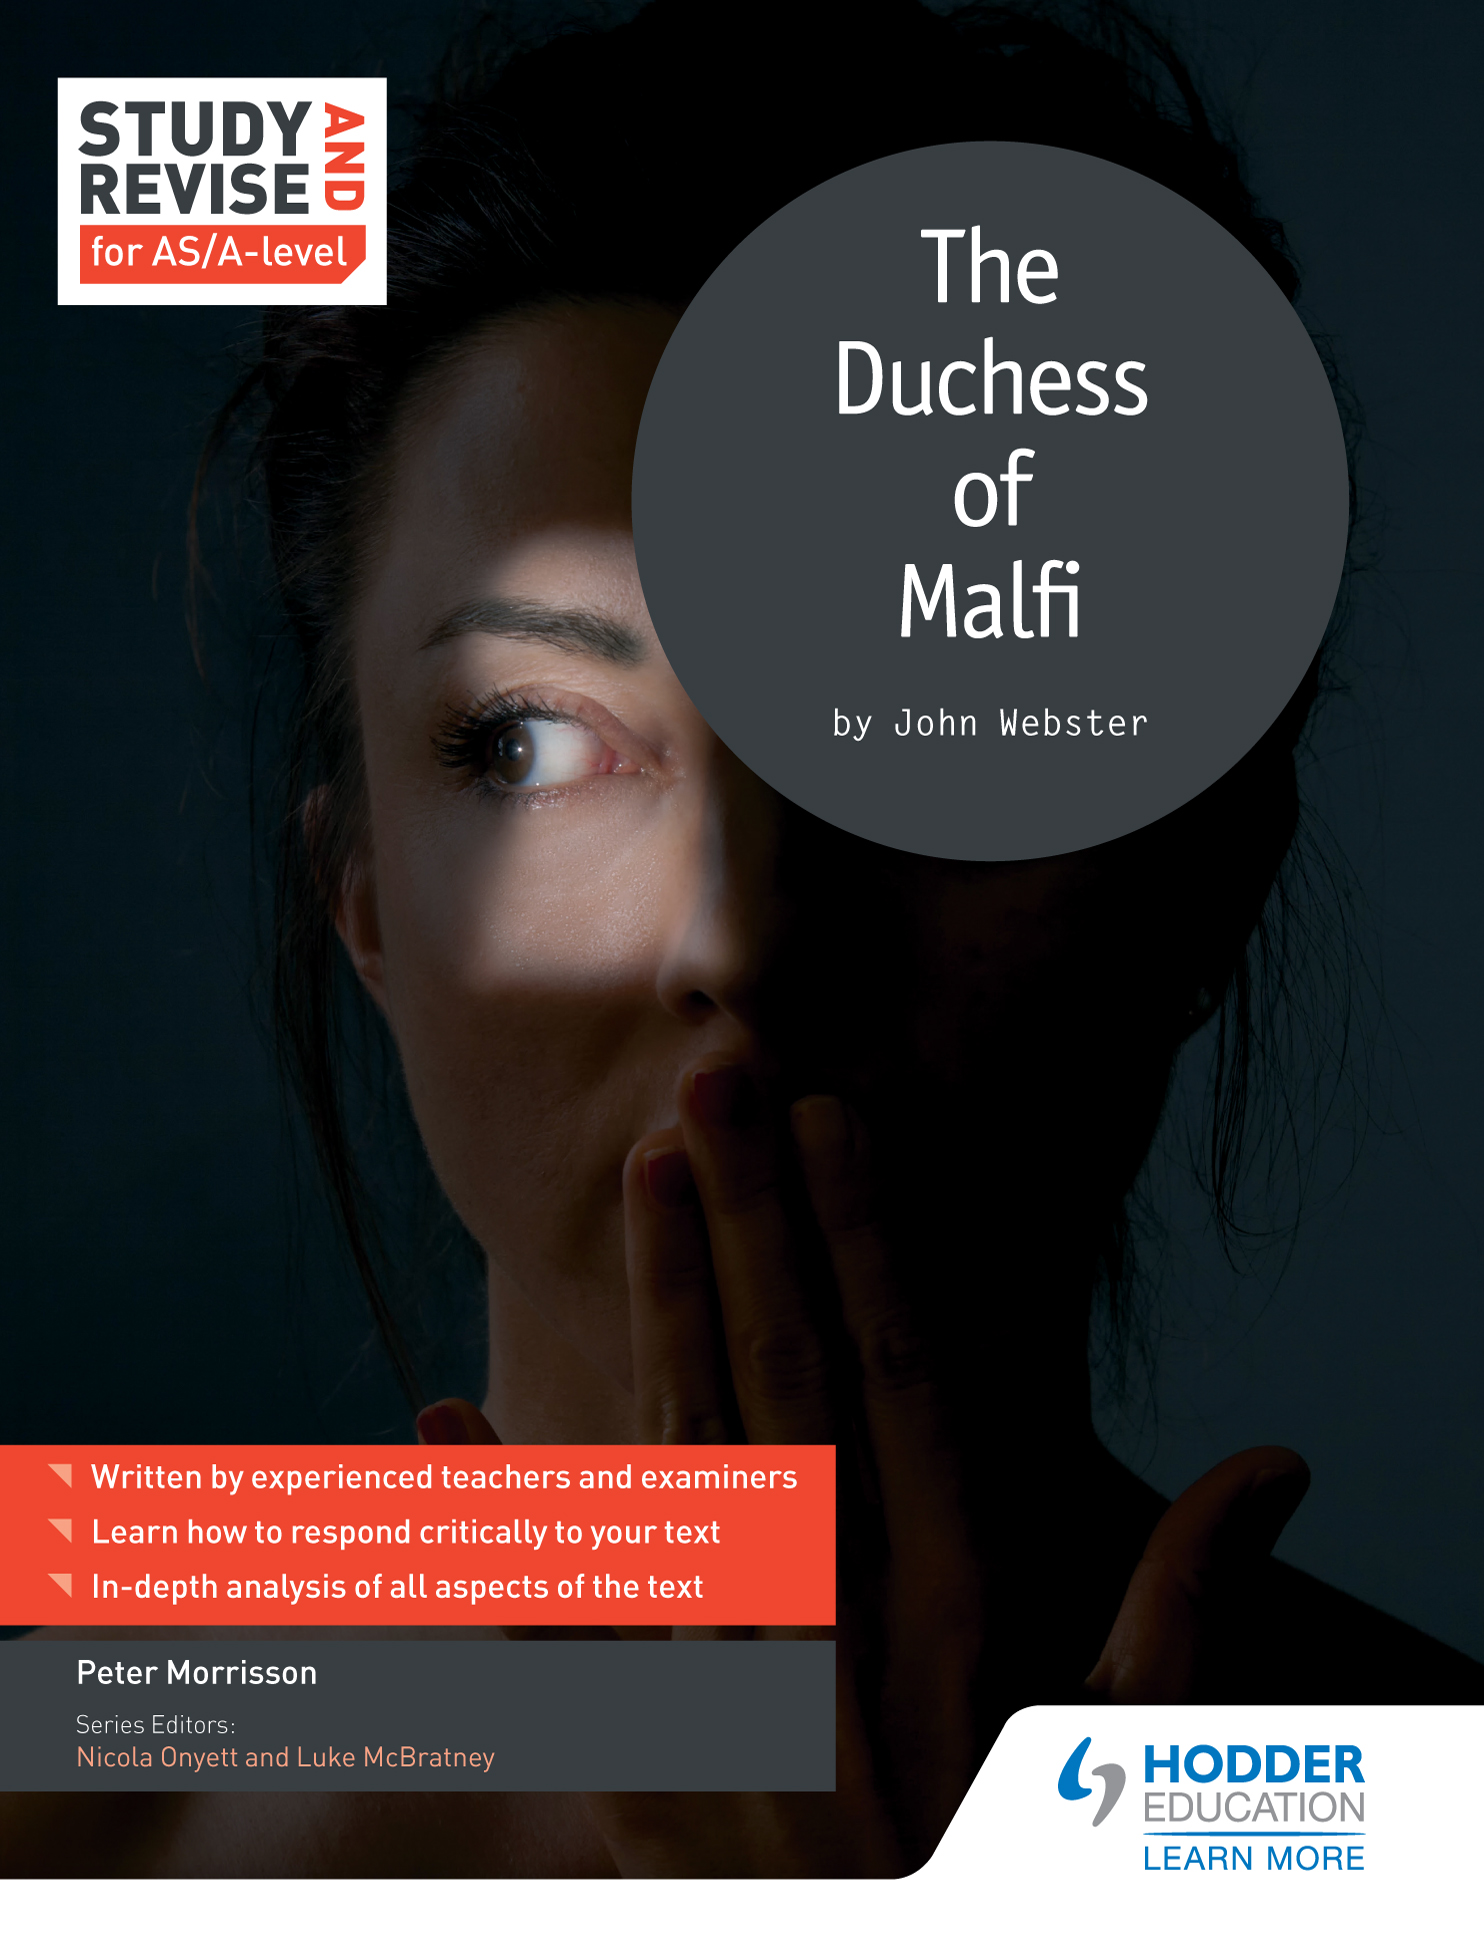 [DESCATALOGADO] Study and Revise for AS/A-level: The Duchess of Malfi